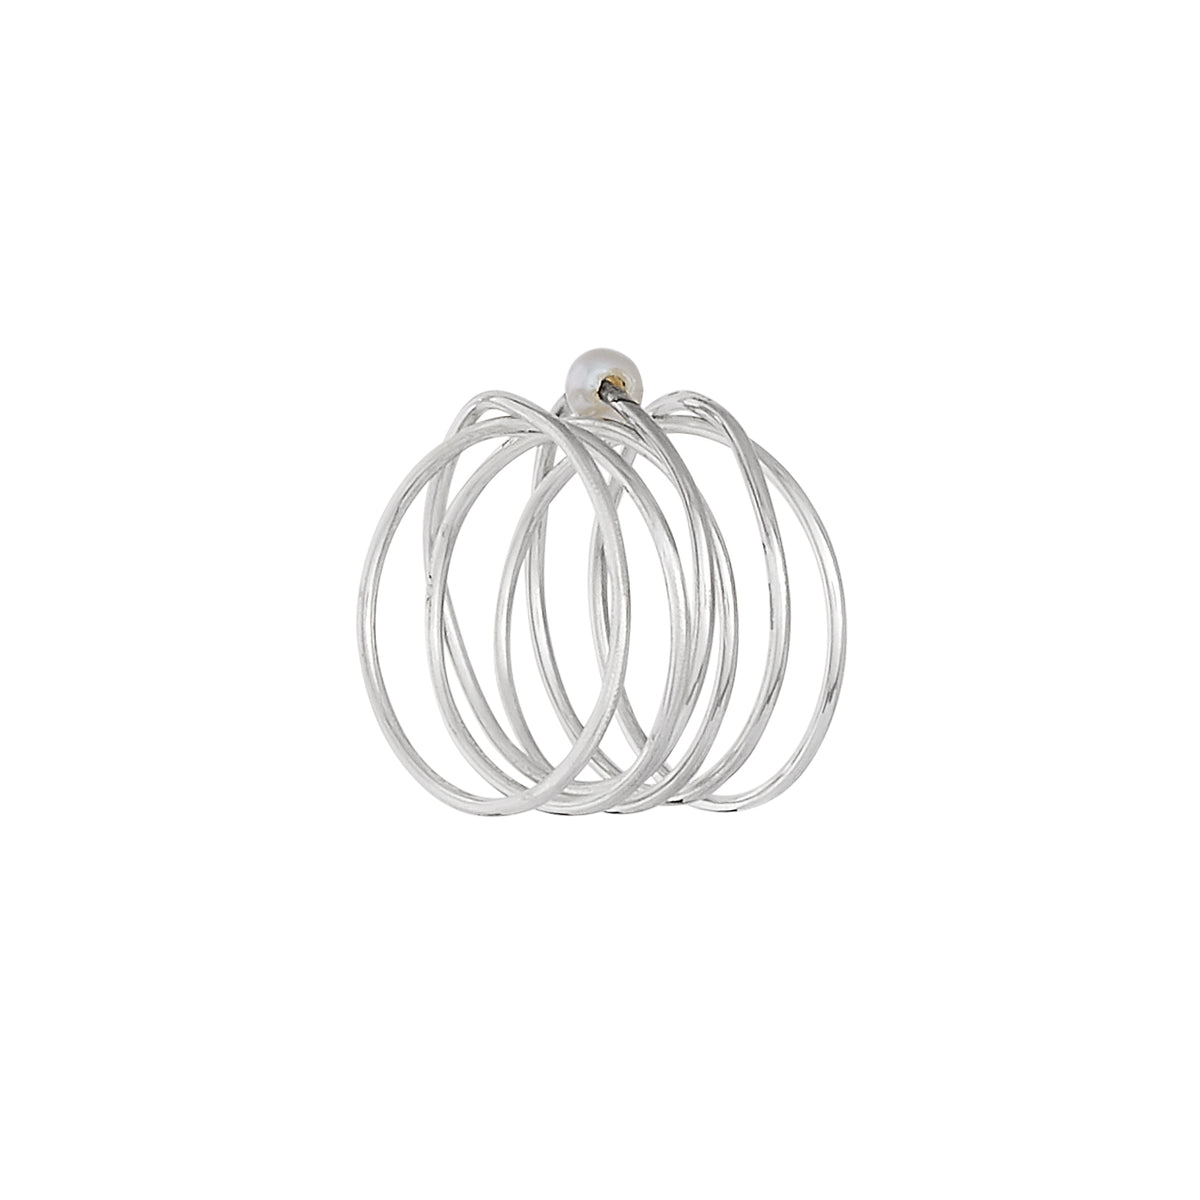 VIKA jewels pearl spiral wire ring statement handmade Bali recycled recycling sterling silver silber fashion jewellery jewelry